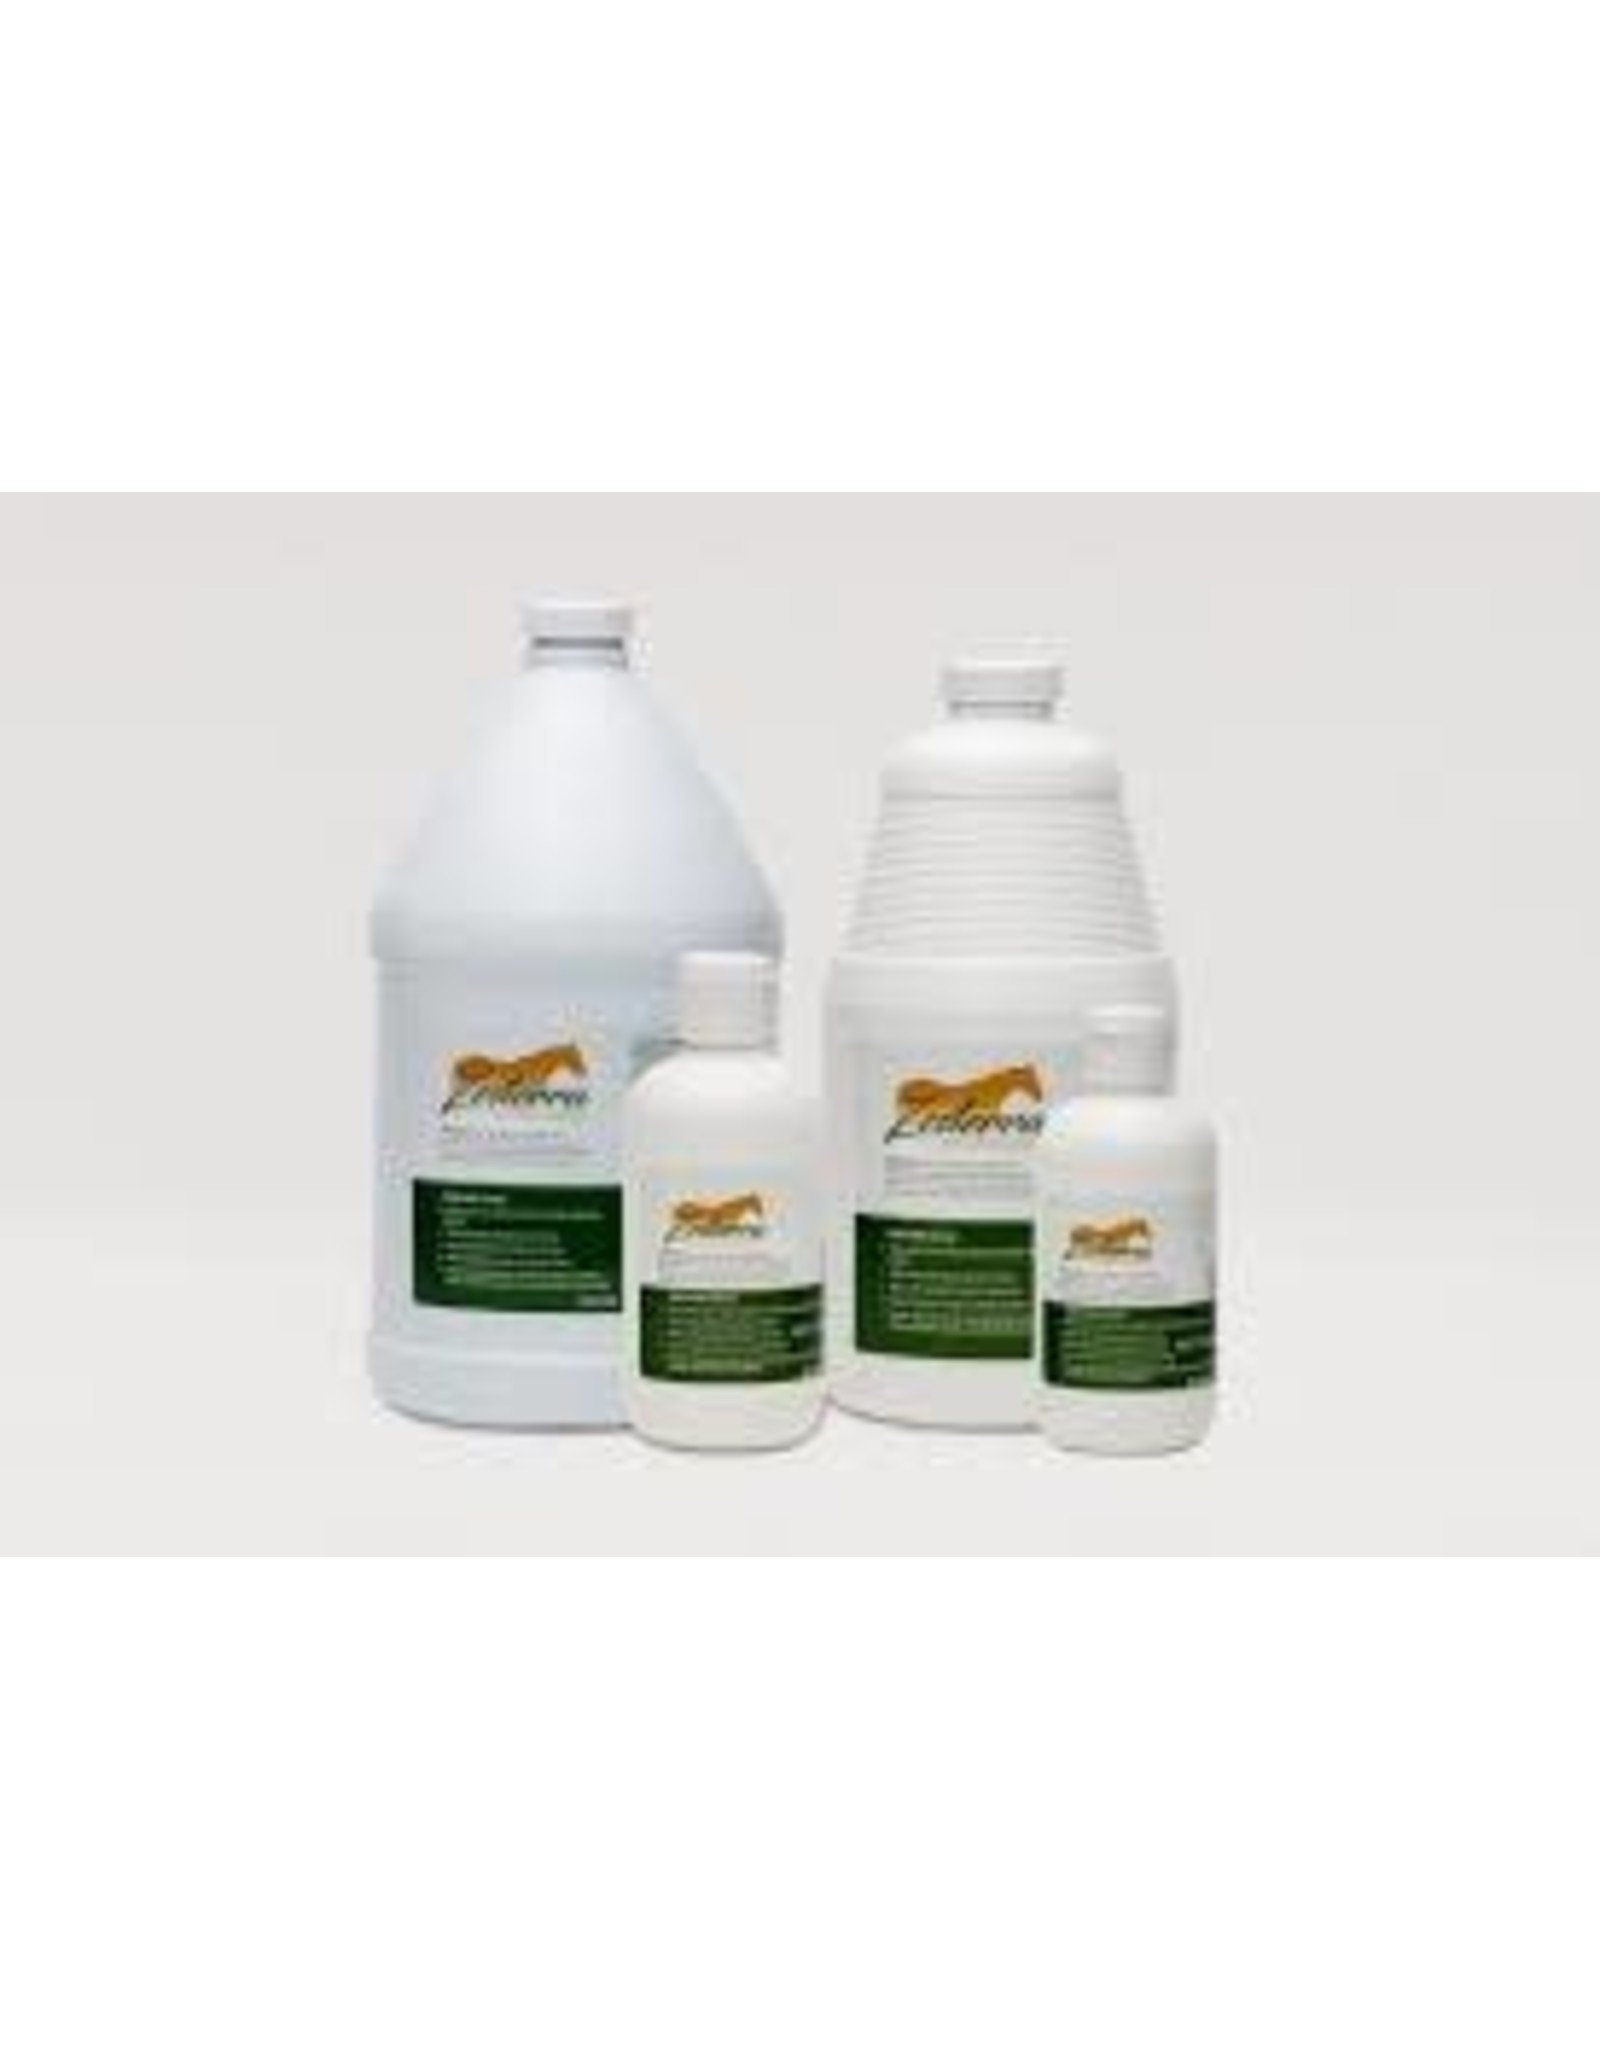 Zesterra Zesterra - 100% All-Natural Supplement For Horses.  Formulated to provide support for horses that are prone to stress or experience ulcers or ulcer symptoms.   ZE 500ml